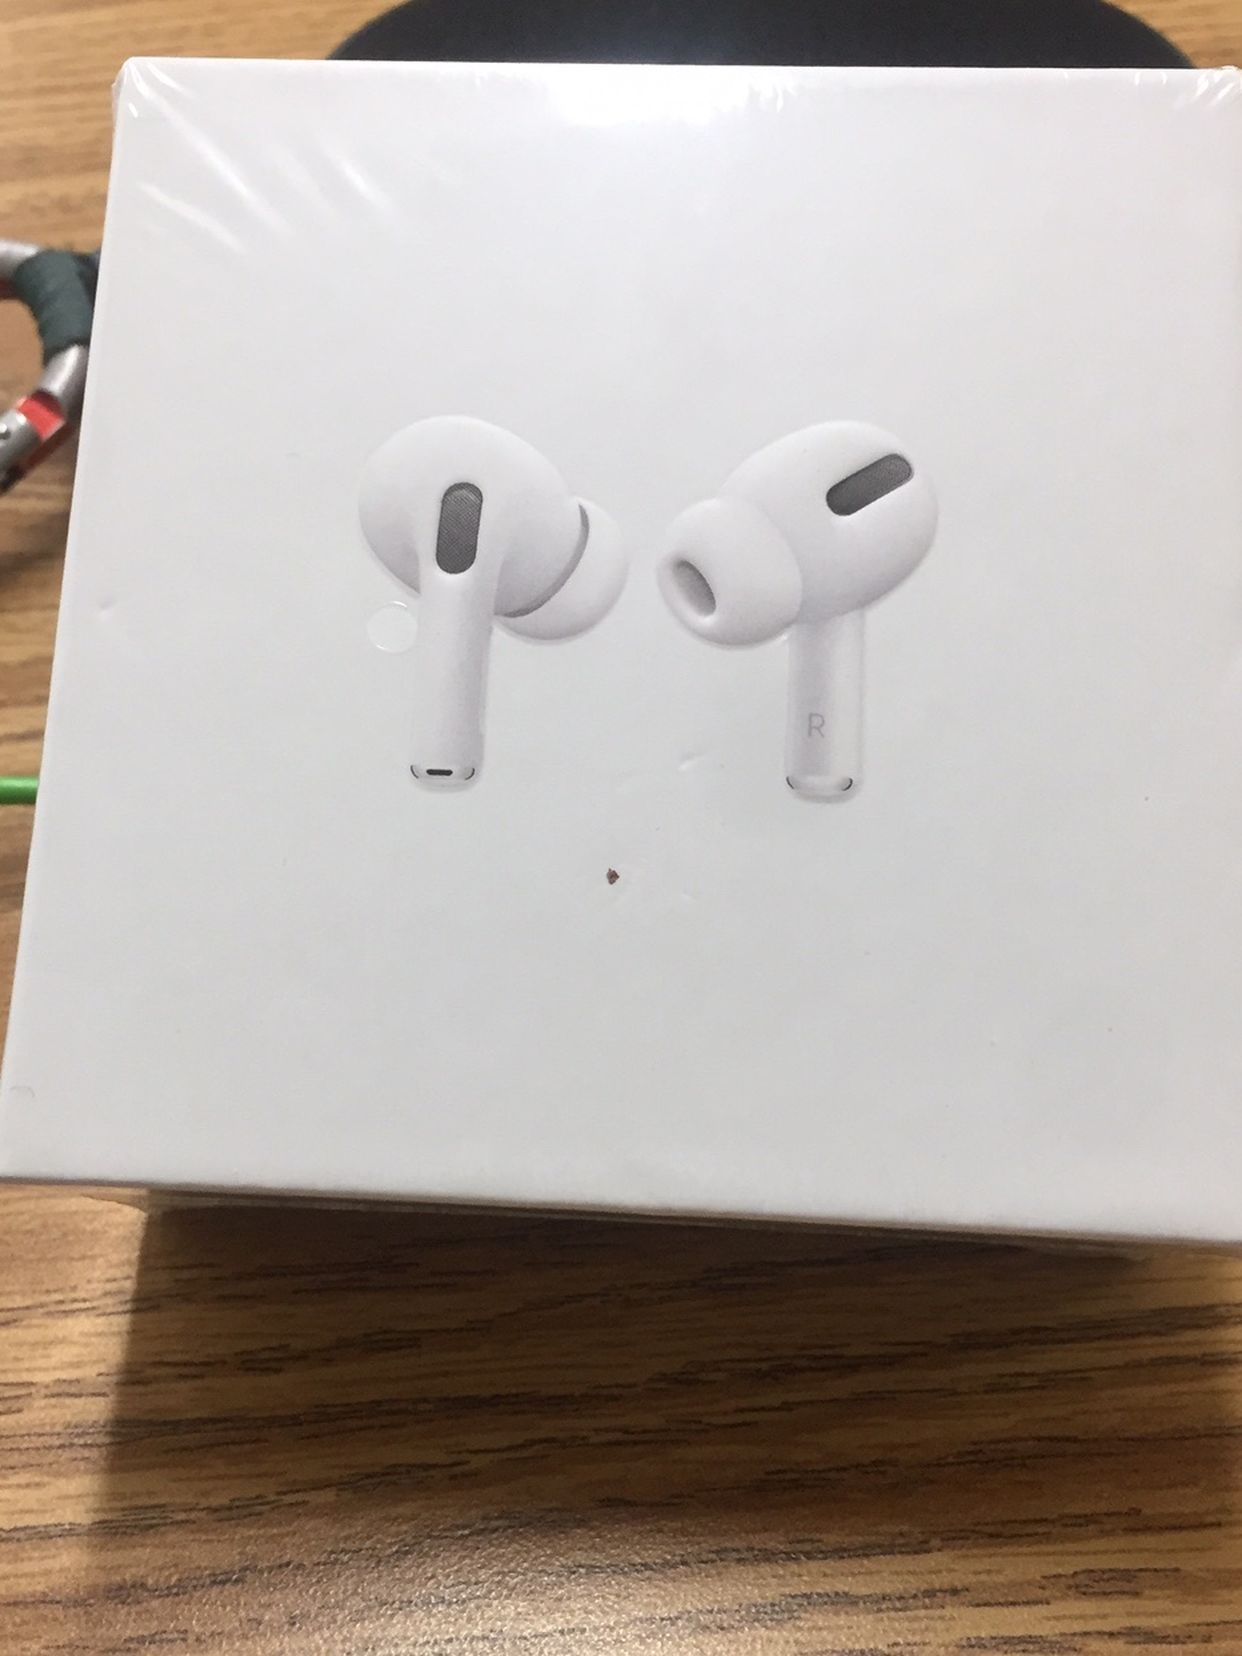 Apple AirPods Pro (Noise Cancellation, Waterproof, GPS, Etc)